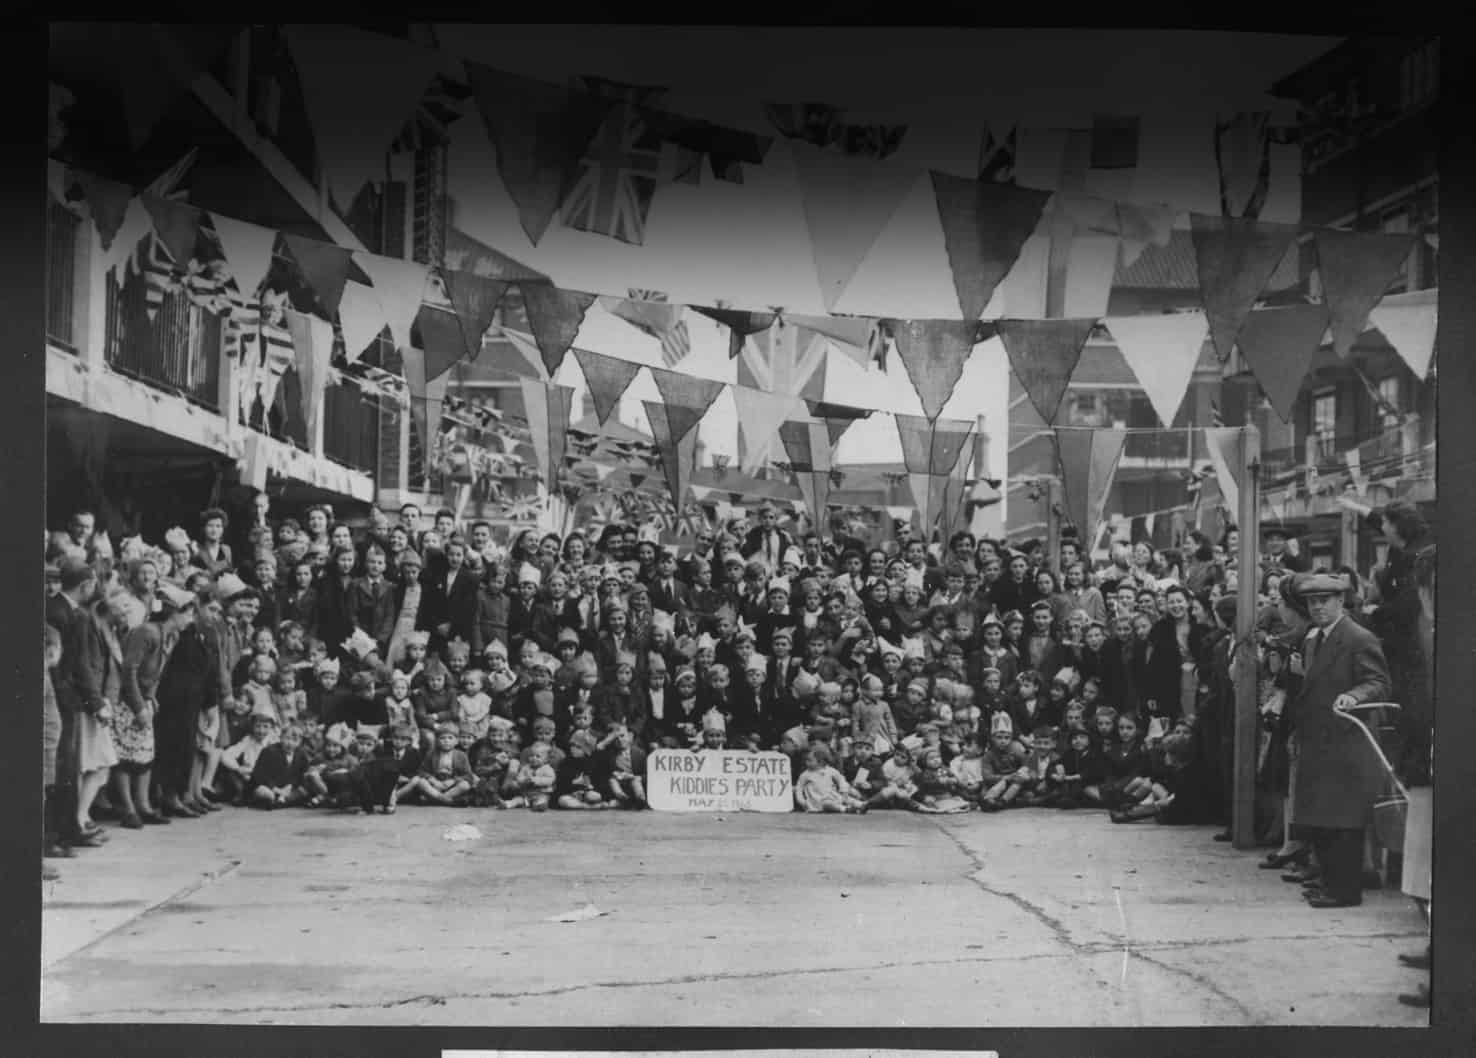 Kirby Estate victory party for VE Day - Image: Southwark History Library